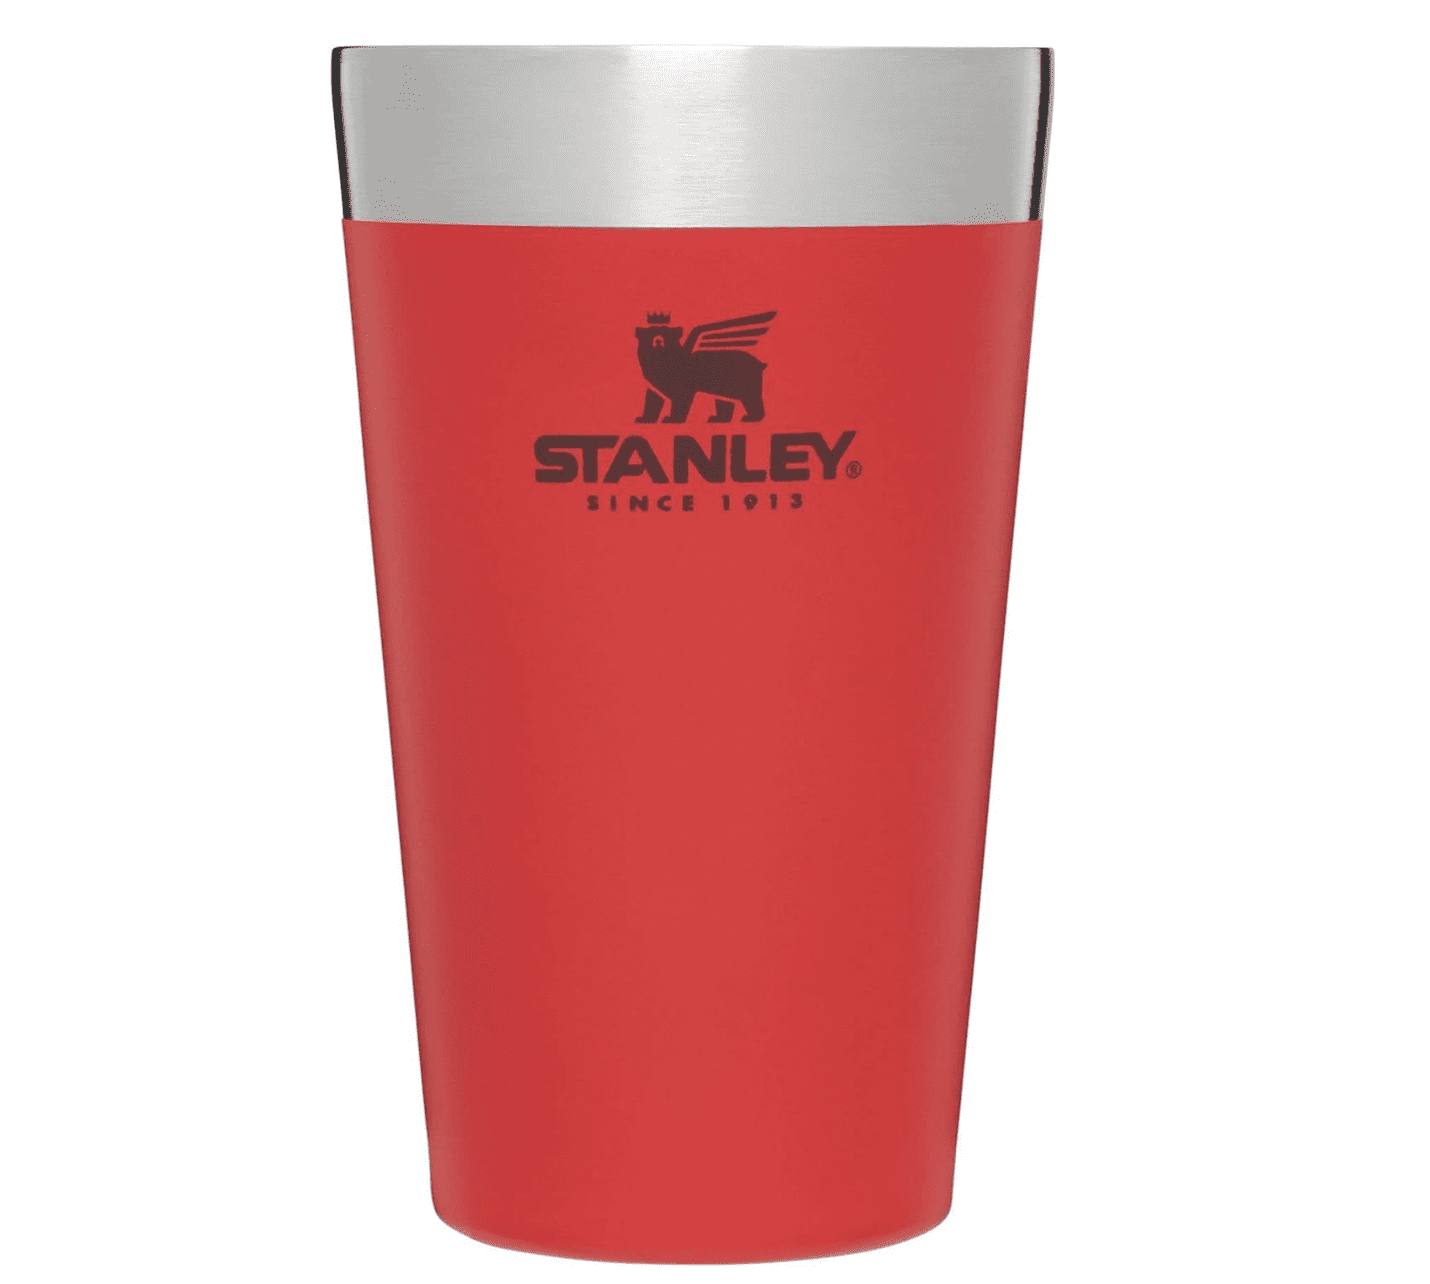 Attn: We Found Stanley Cups on Sale for  Prime Big Deal Days